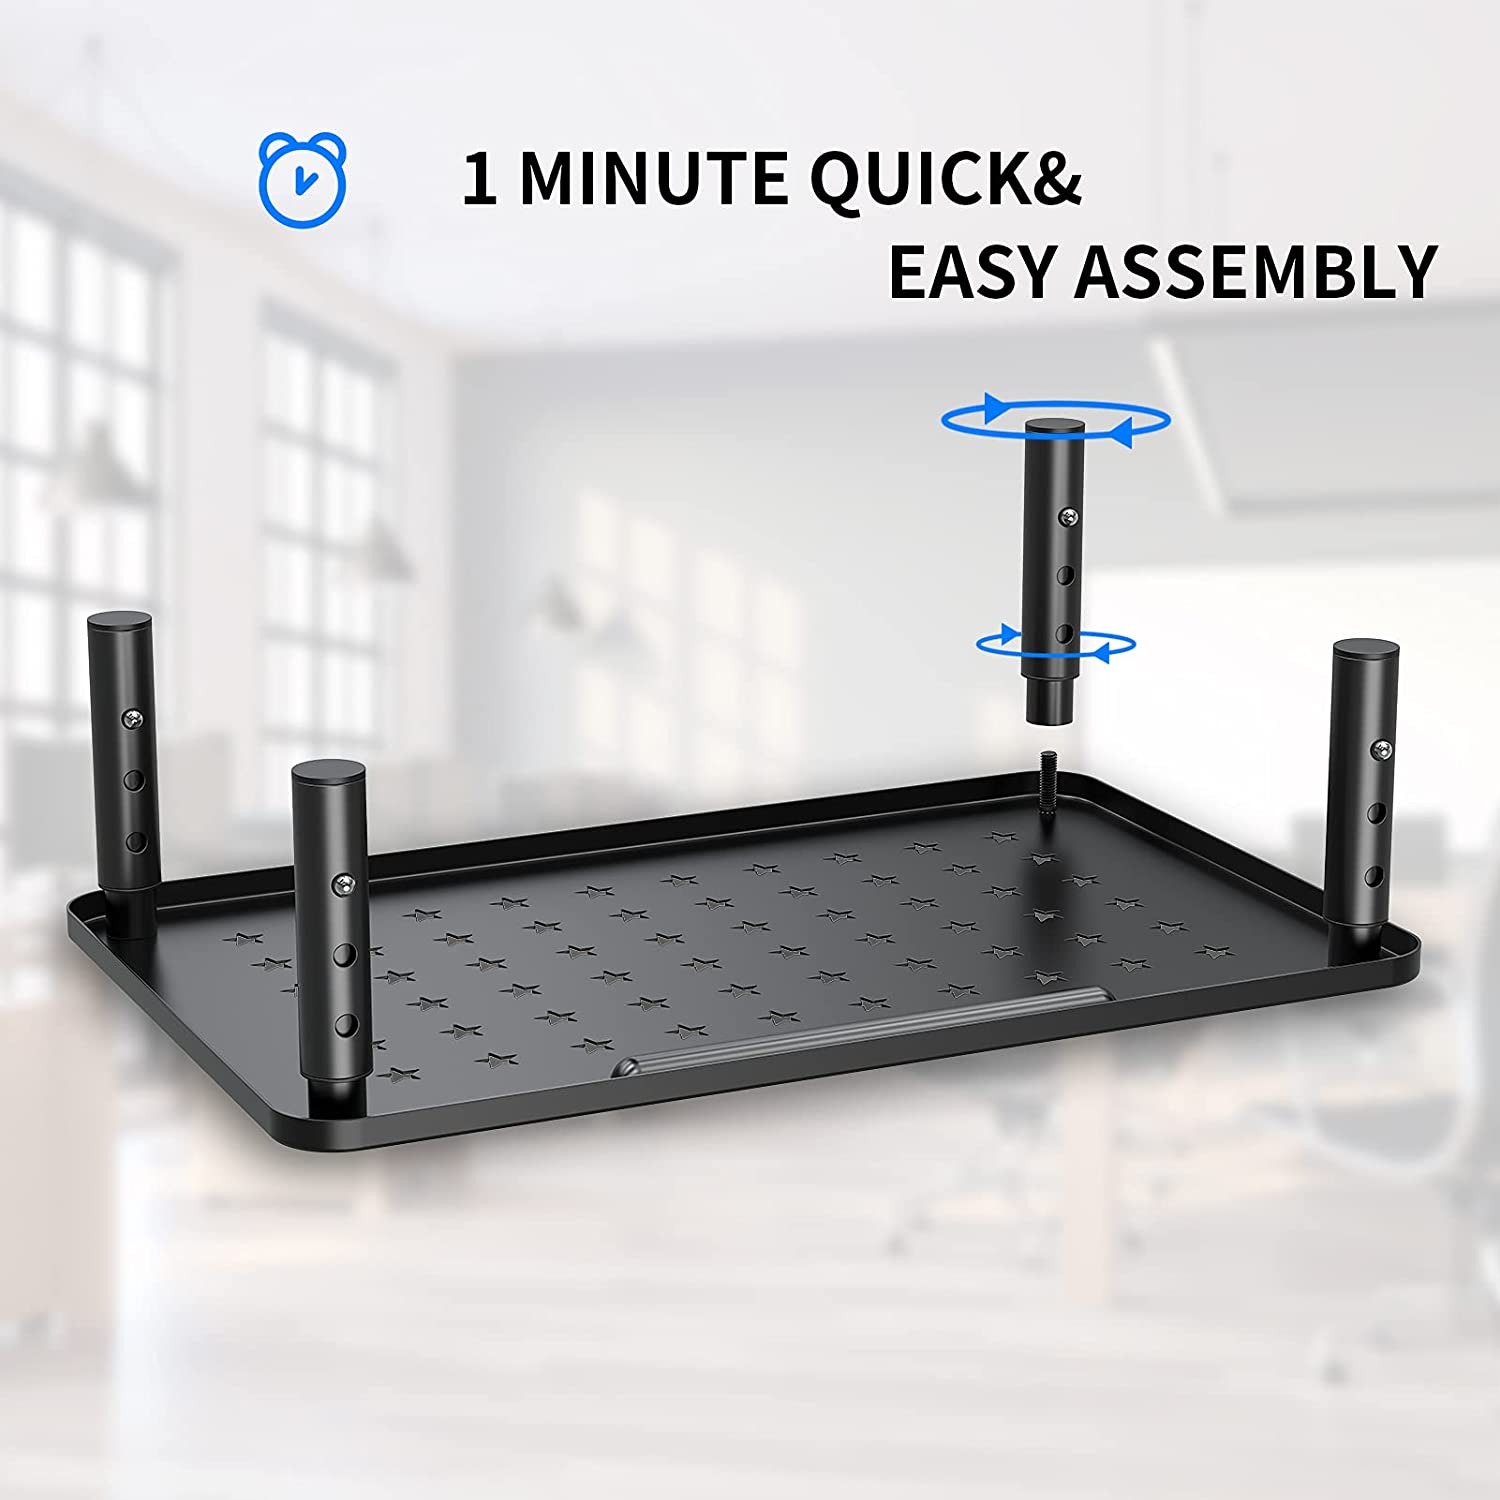 monitor stand easy assembly